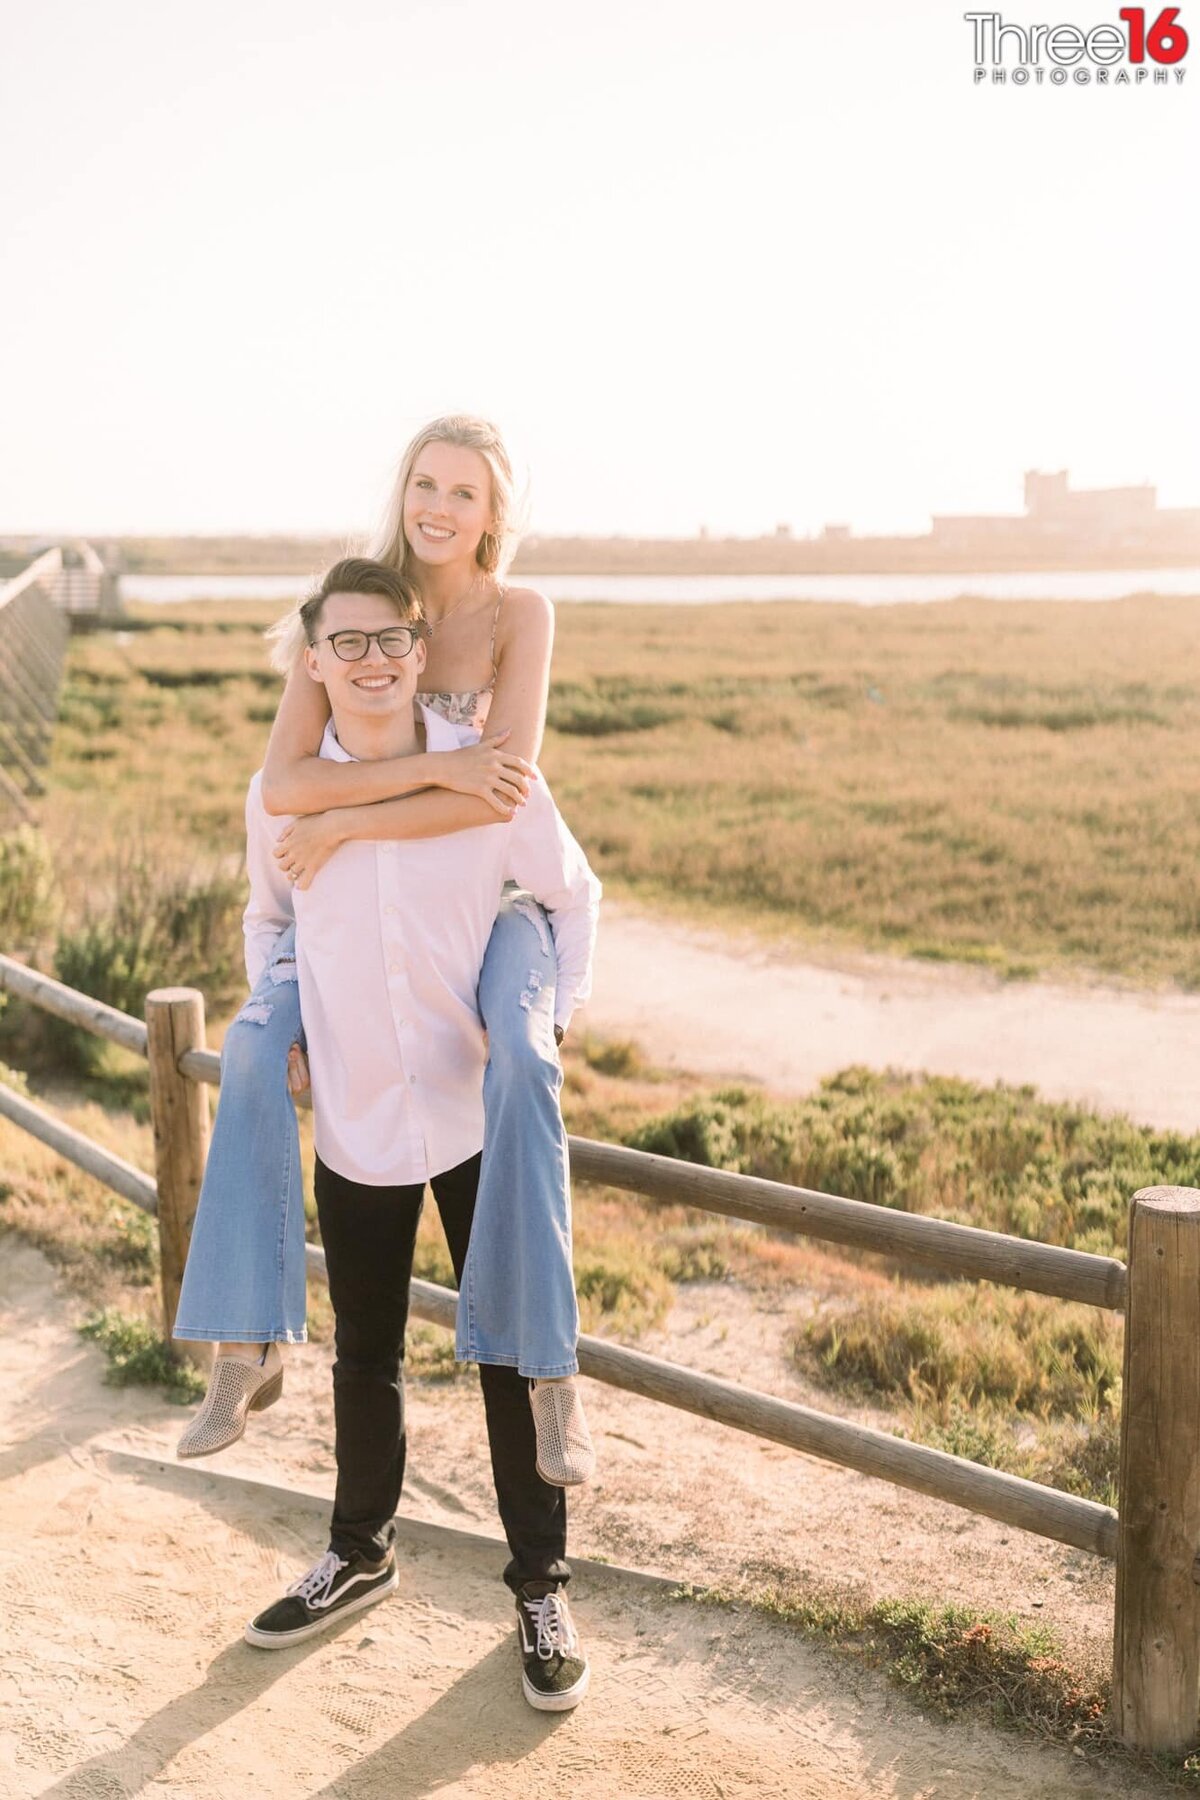 Groom to be carries his Bride on his back during photo session